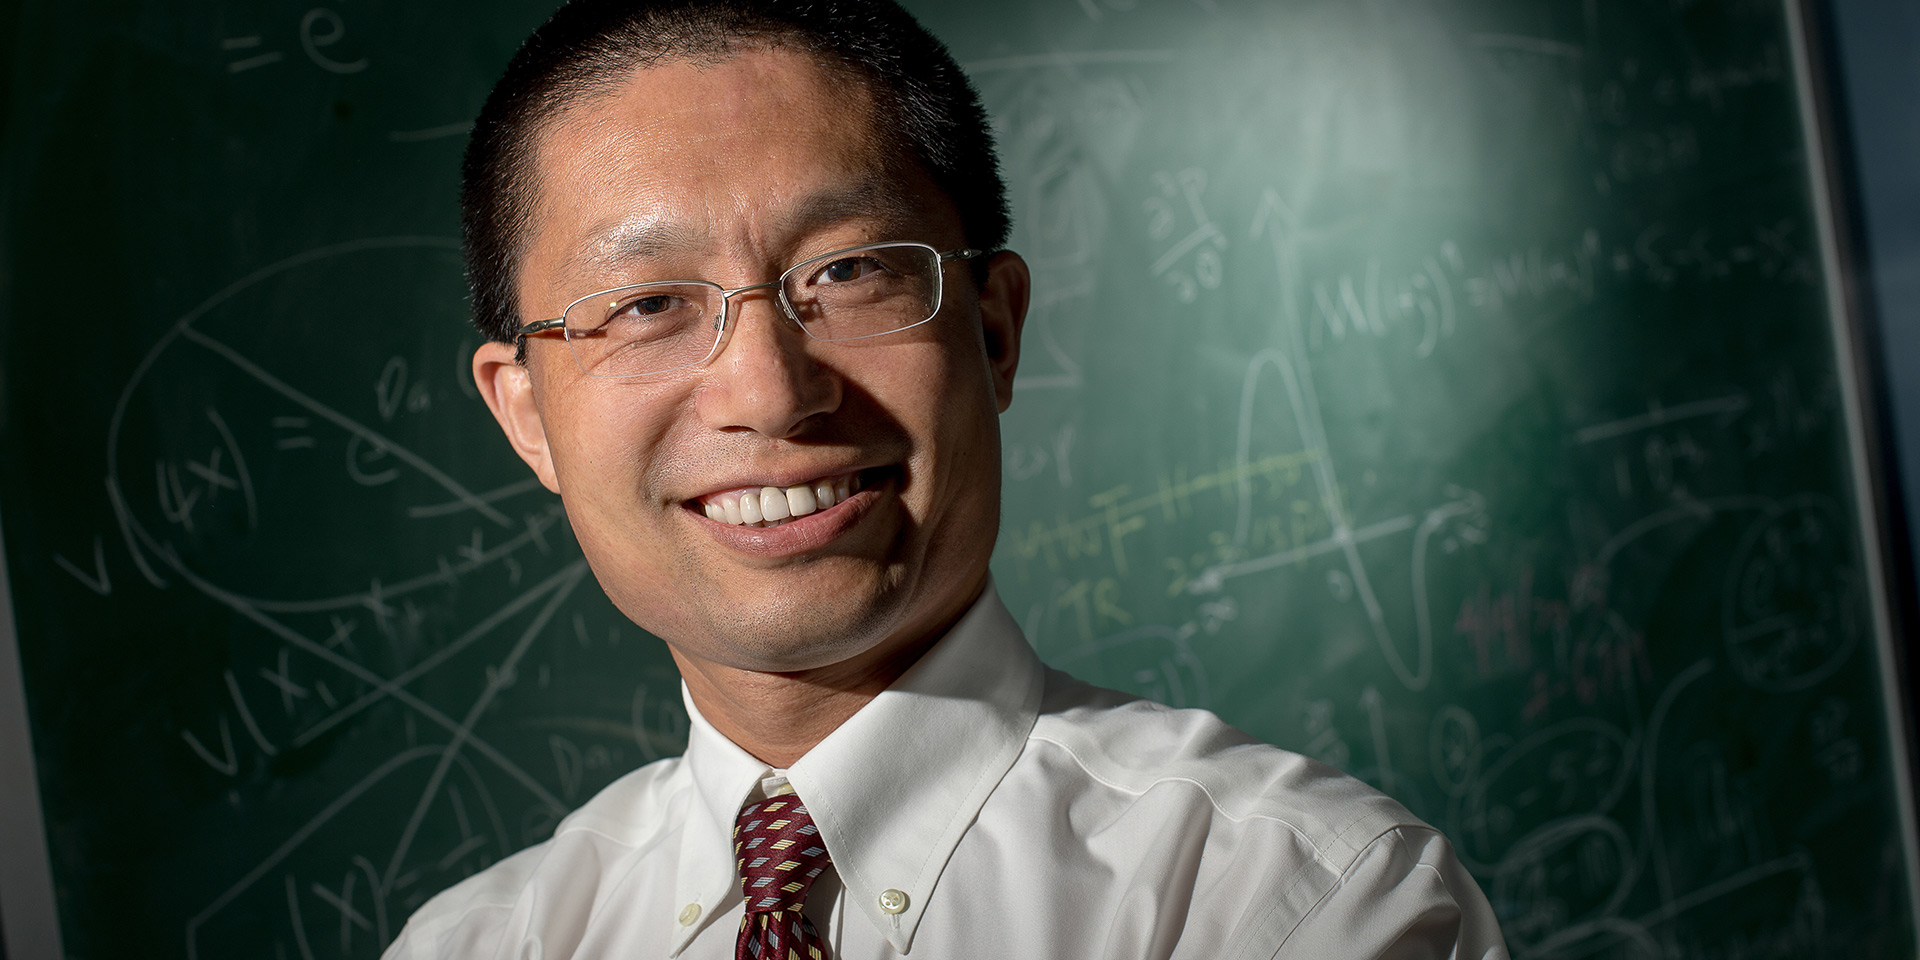 A professor standing in front of a chalkboard filled with math equations